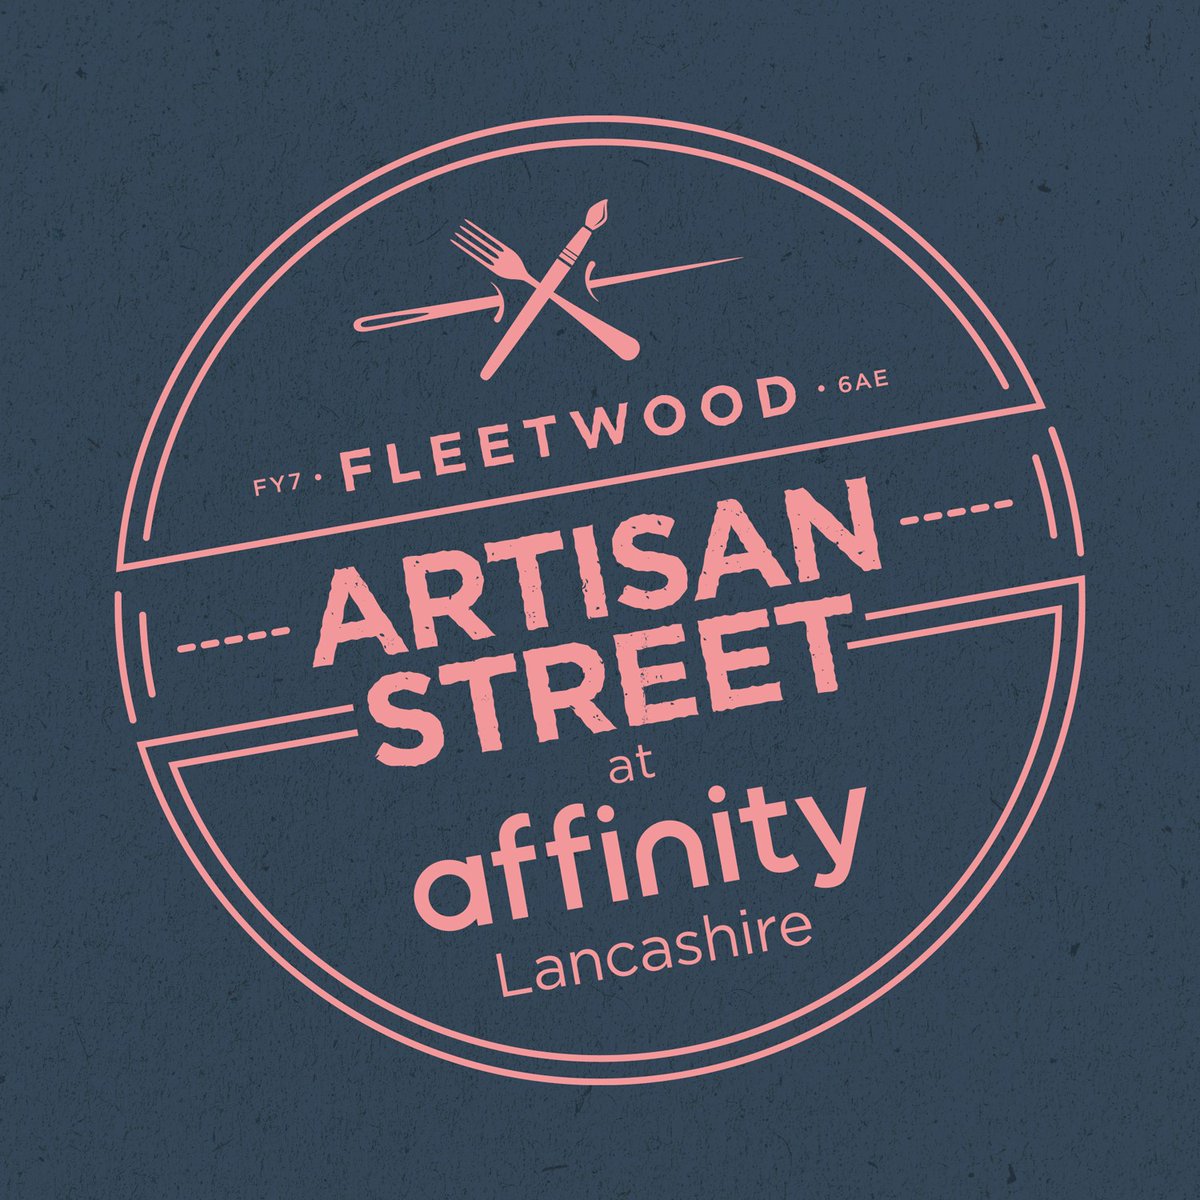 Are you interested in trading at our Artisan Street events? We have further events planned in May, July and August and our FESTIVE Artisan Street will be back in November/December too! If you'd like more information then just drop us an email on lancashire@affinityoutlets.com